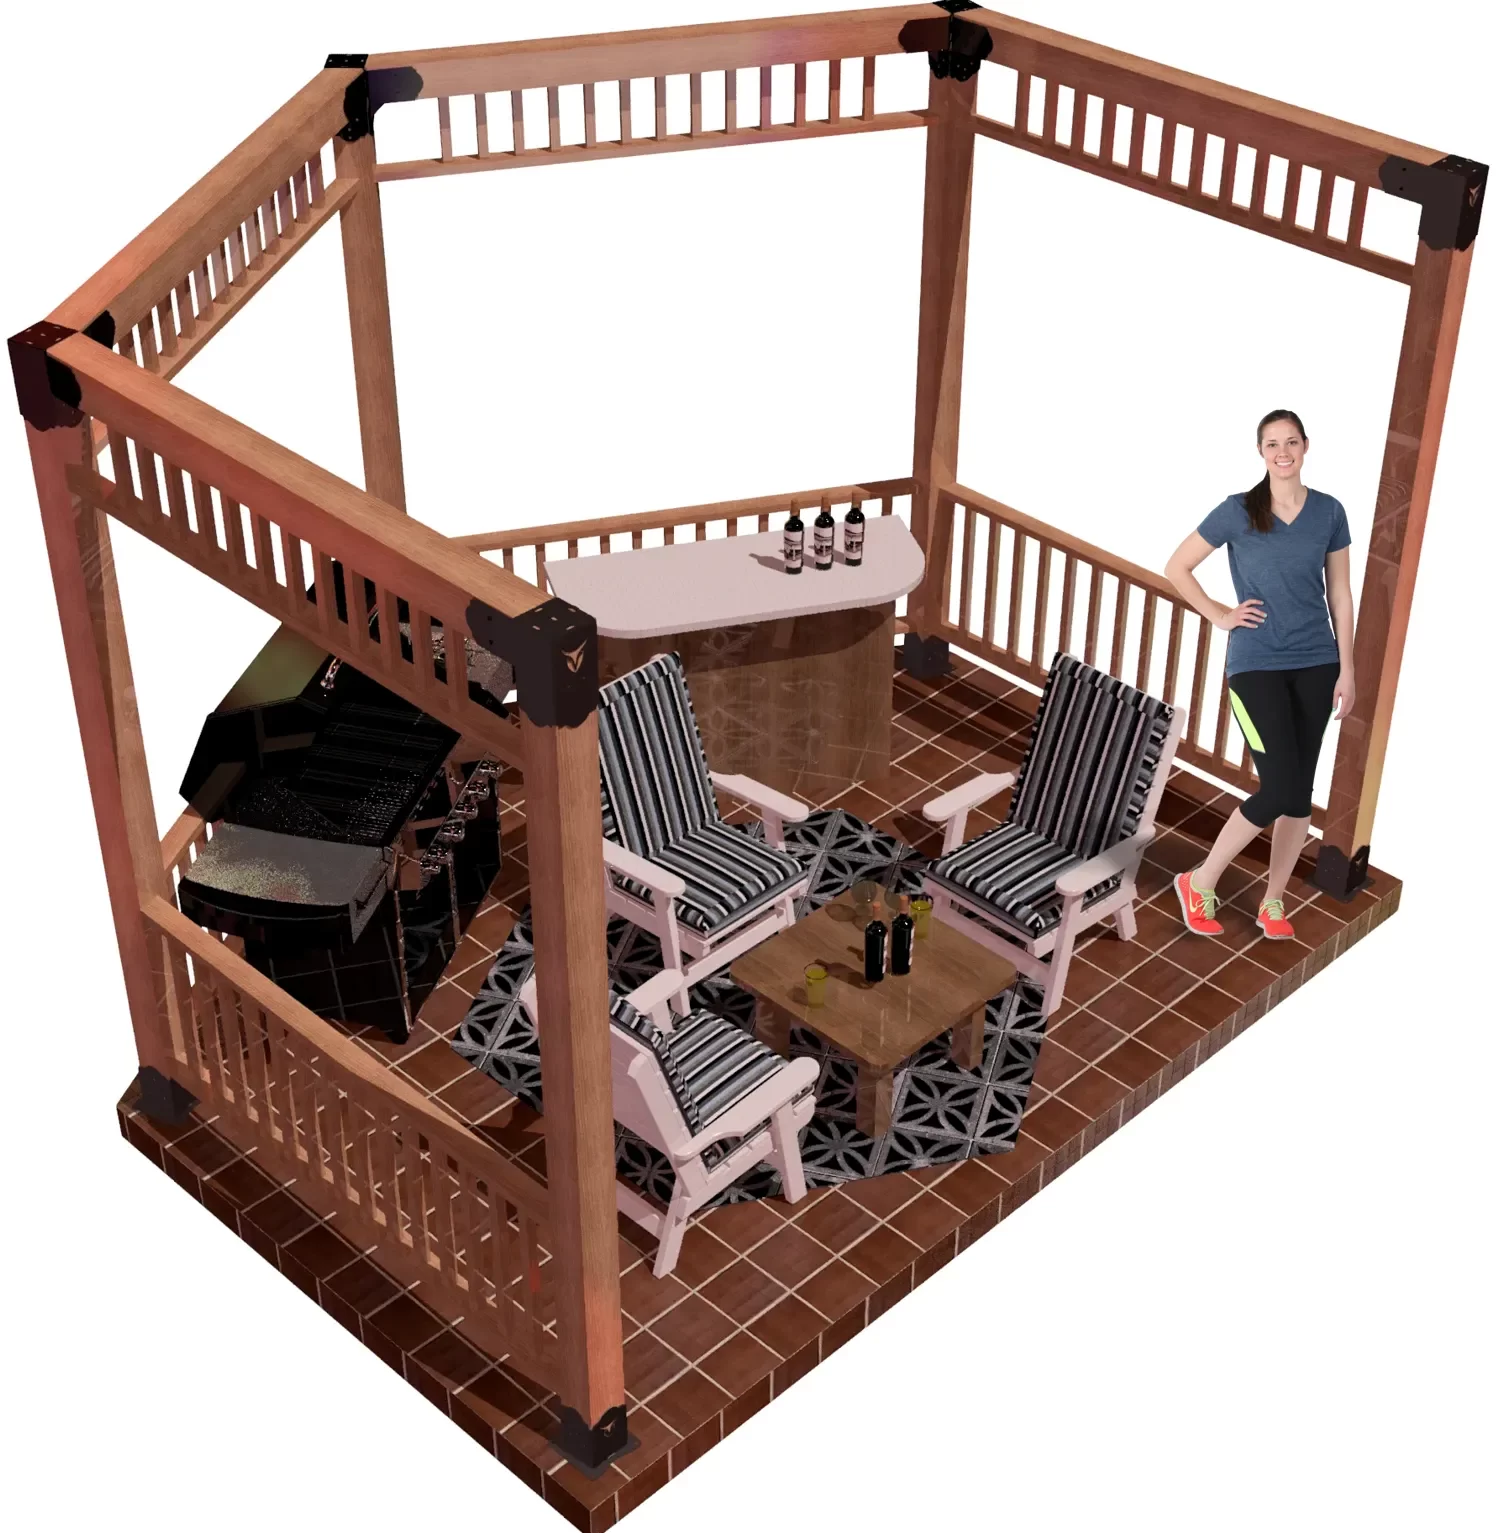 view of a 6x6 open top partial hexagon pergola. A bar with wine bottles, barbecue, and casual furniture inside and a girl standing smiling.